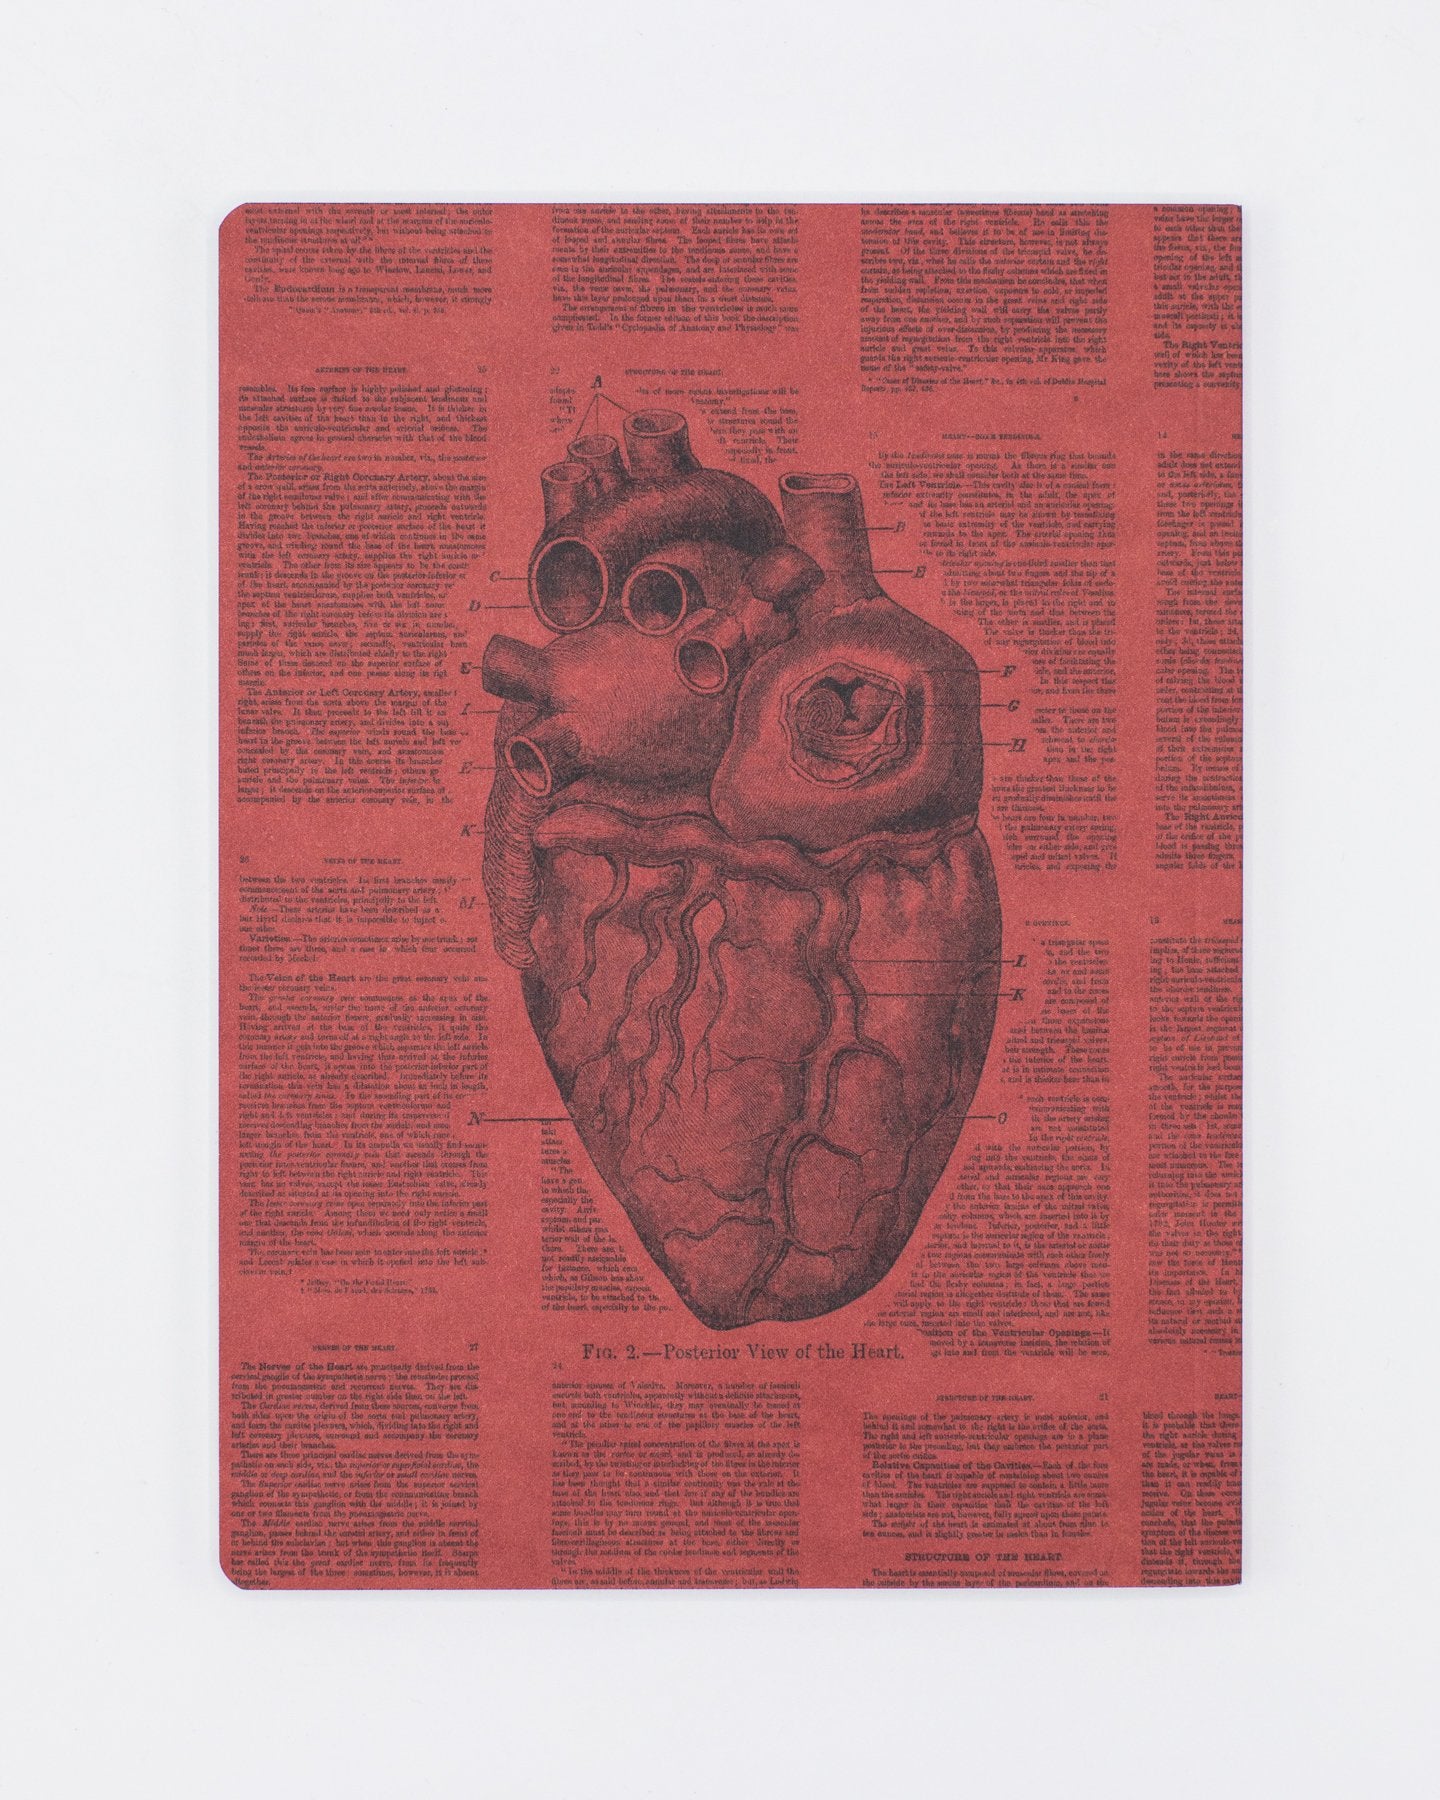 Anatomical Heart Softcover Notebook - Lined